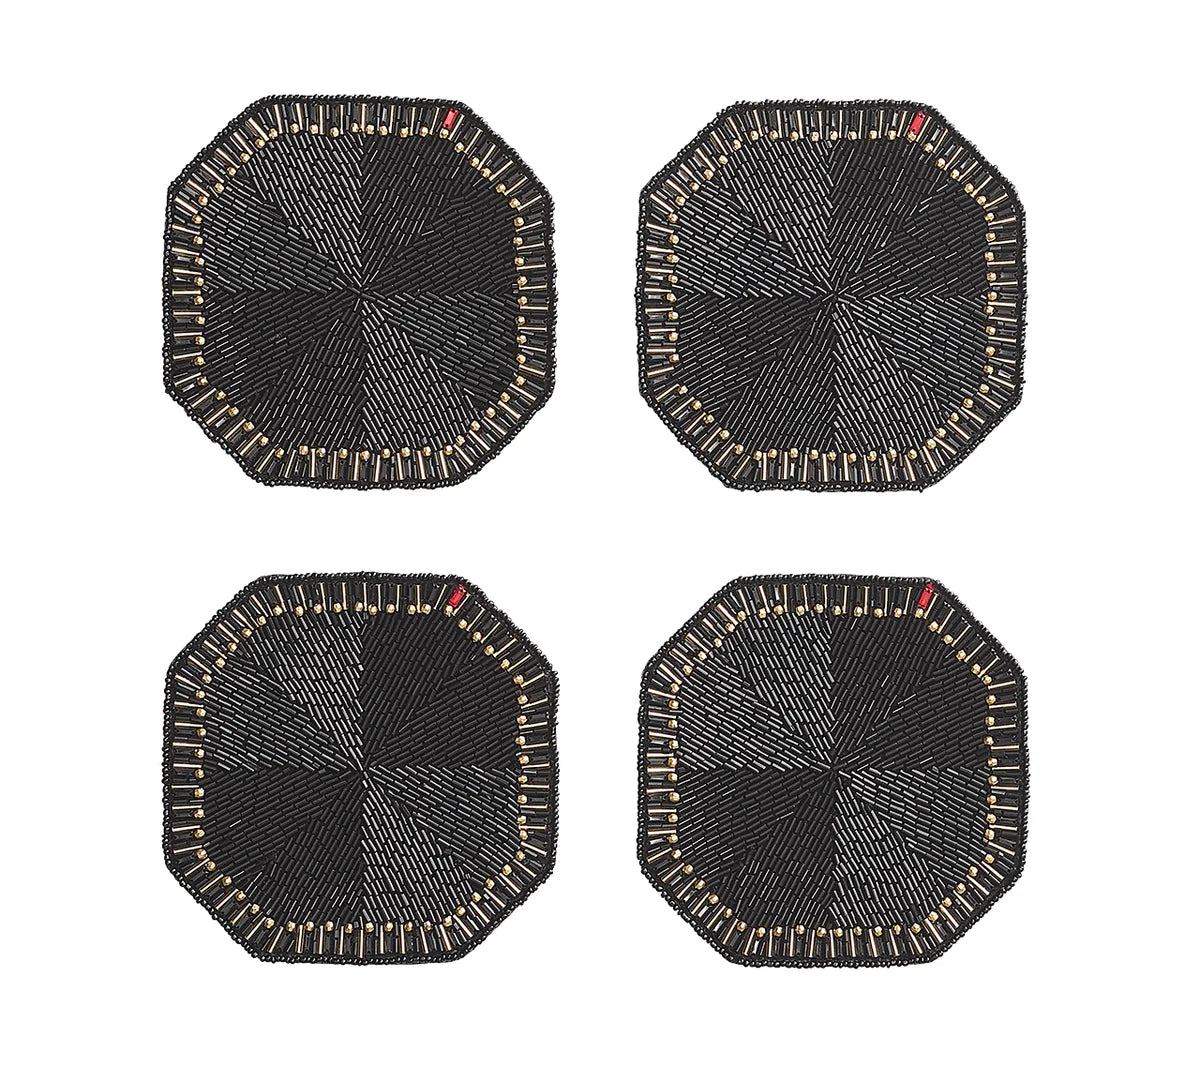 Louxor Coasters in Black, Set of 4 in a Gift Box